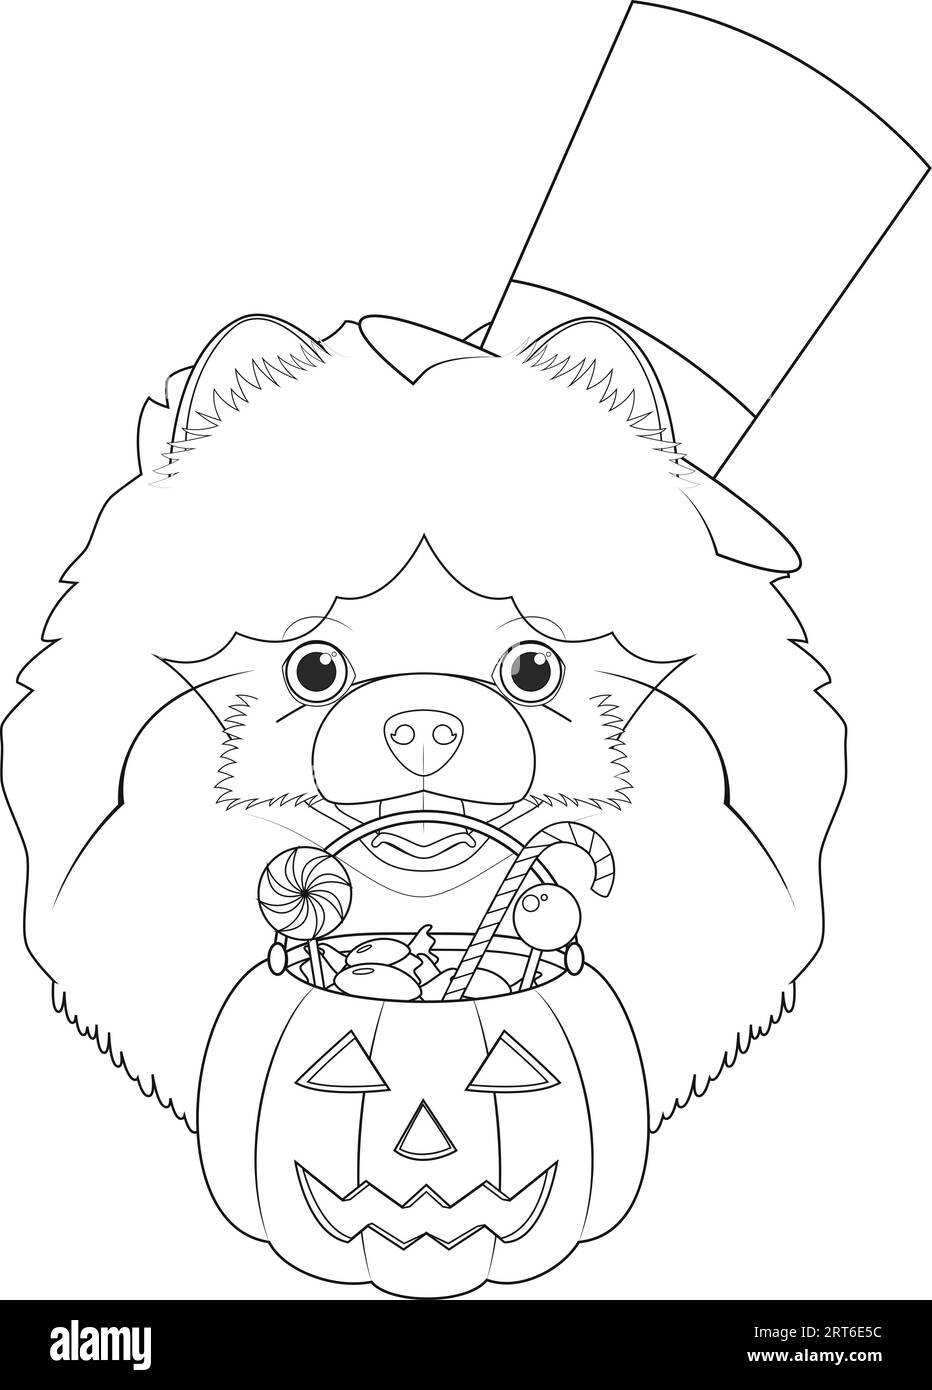 Halloween greeting card for coloring. Pomeranian dog with top hat, mask and a pumpkin with candies in the mouth Stock Vector